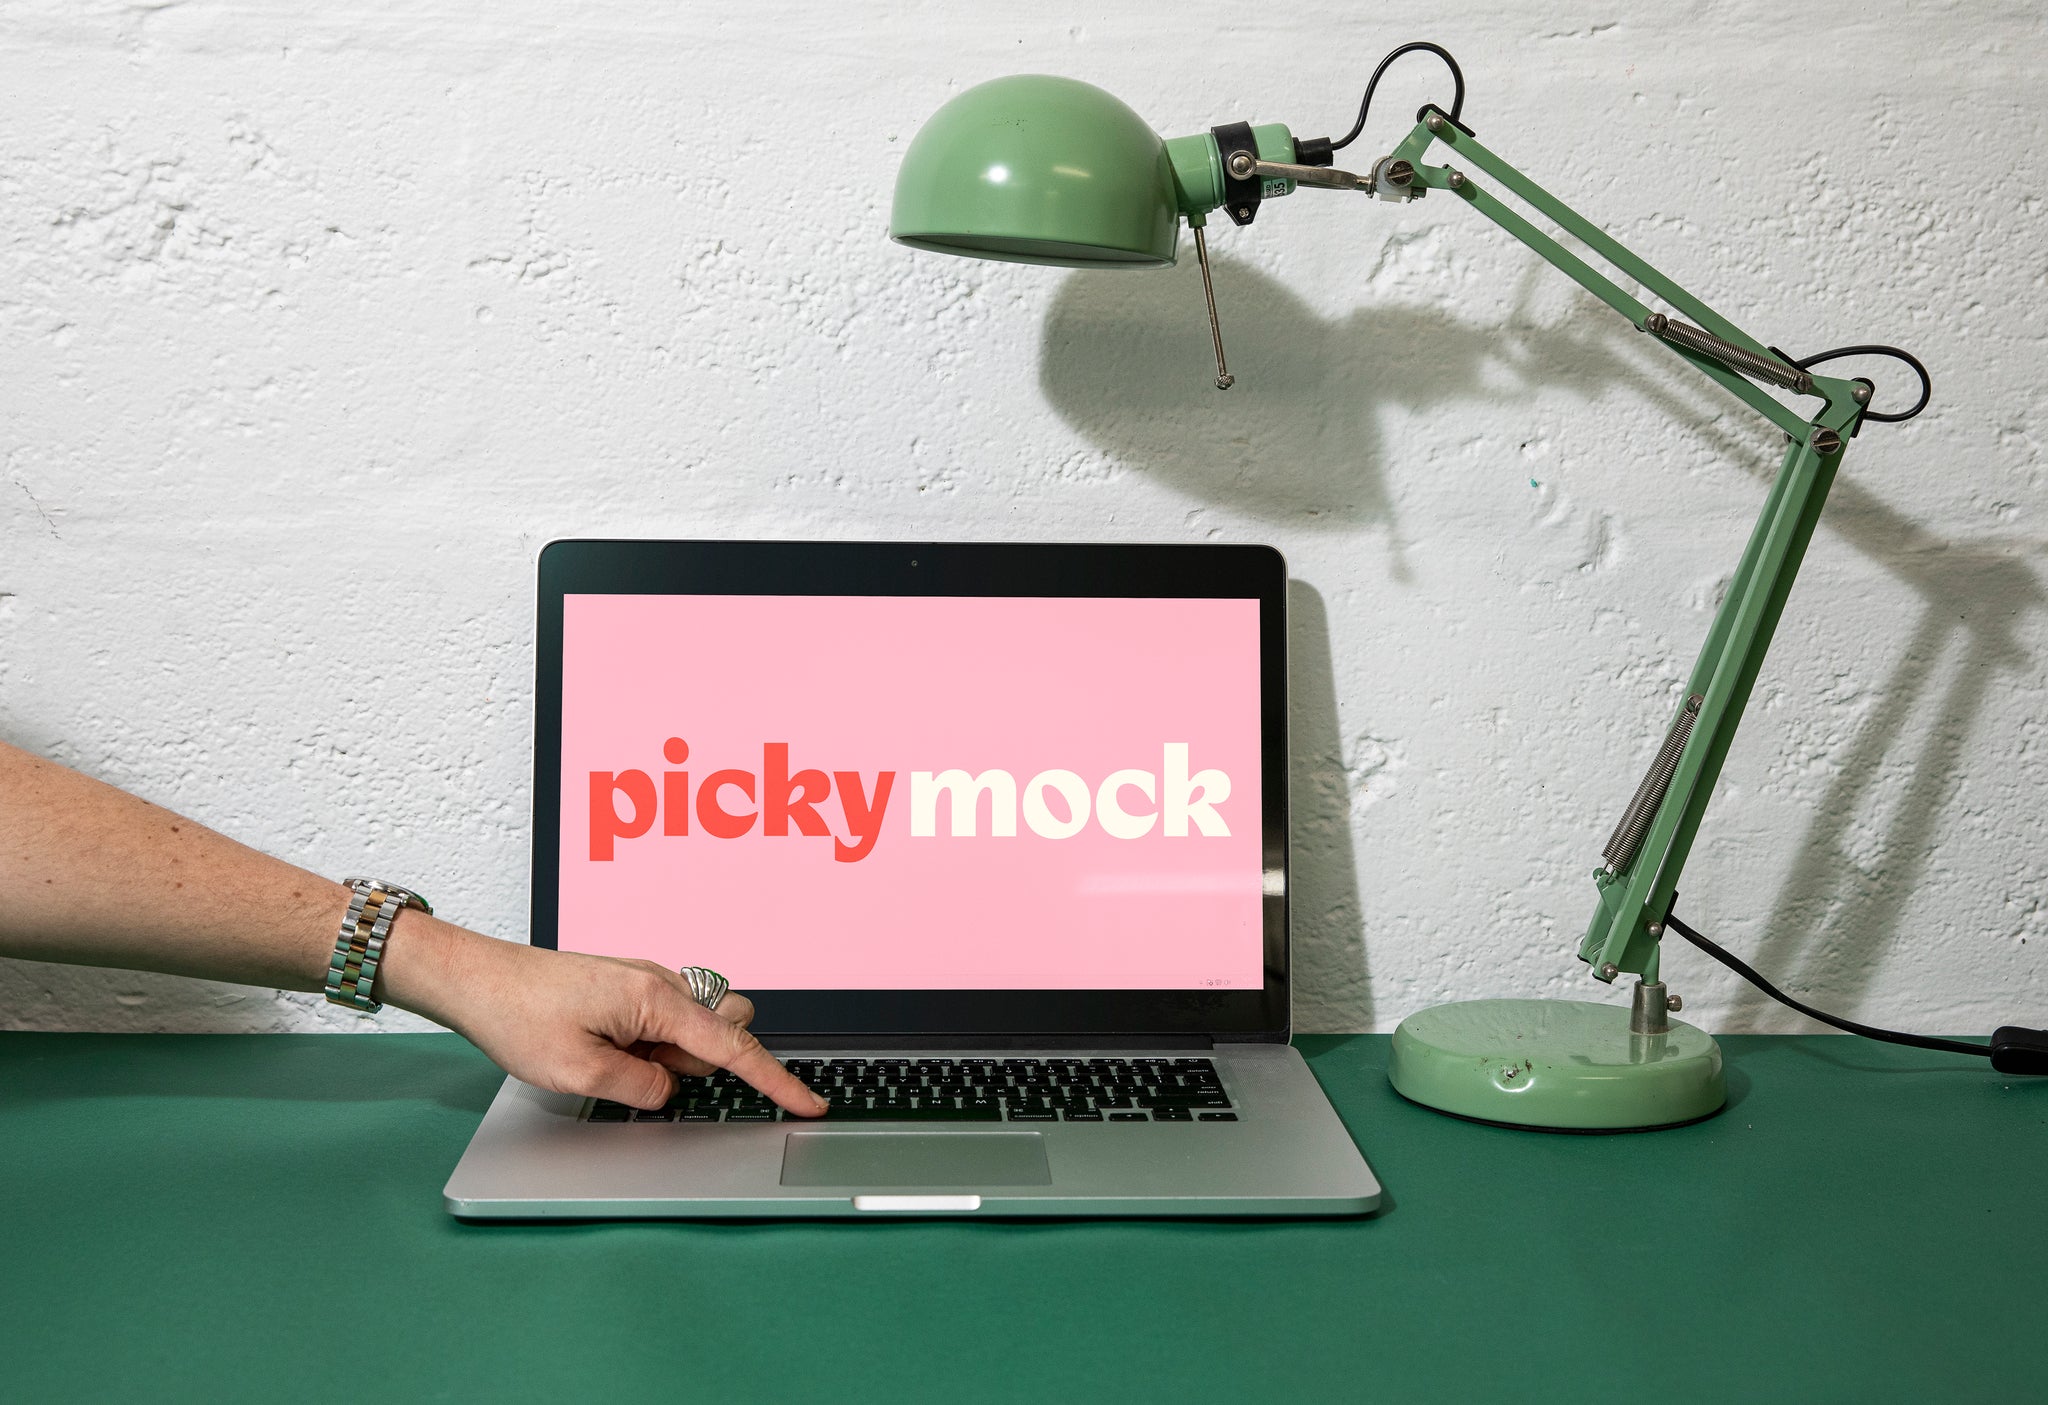 Laptop and green lamp sitting on a desk. Surface is a dark green. Laptop screen is up and a pink frame is on the screen, with the words Picky Mock written on the screen in a bold font. A womans hand is reaching into frame touching the keyboard. 